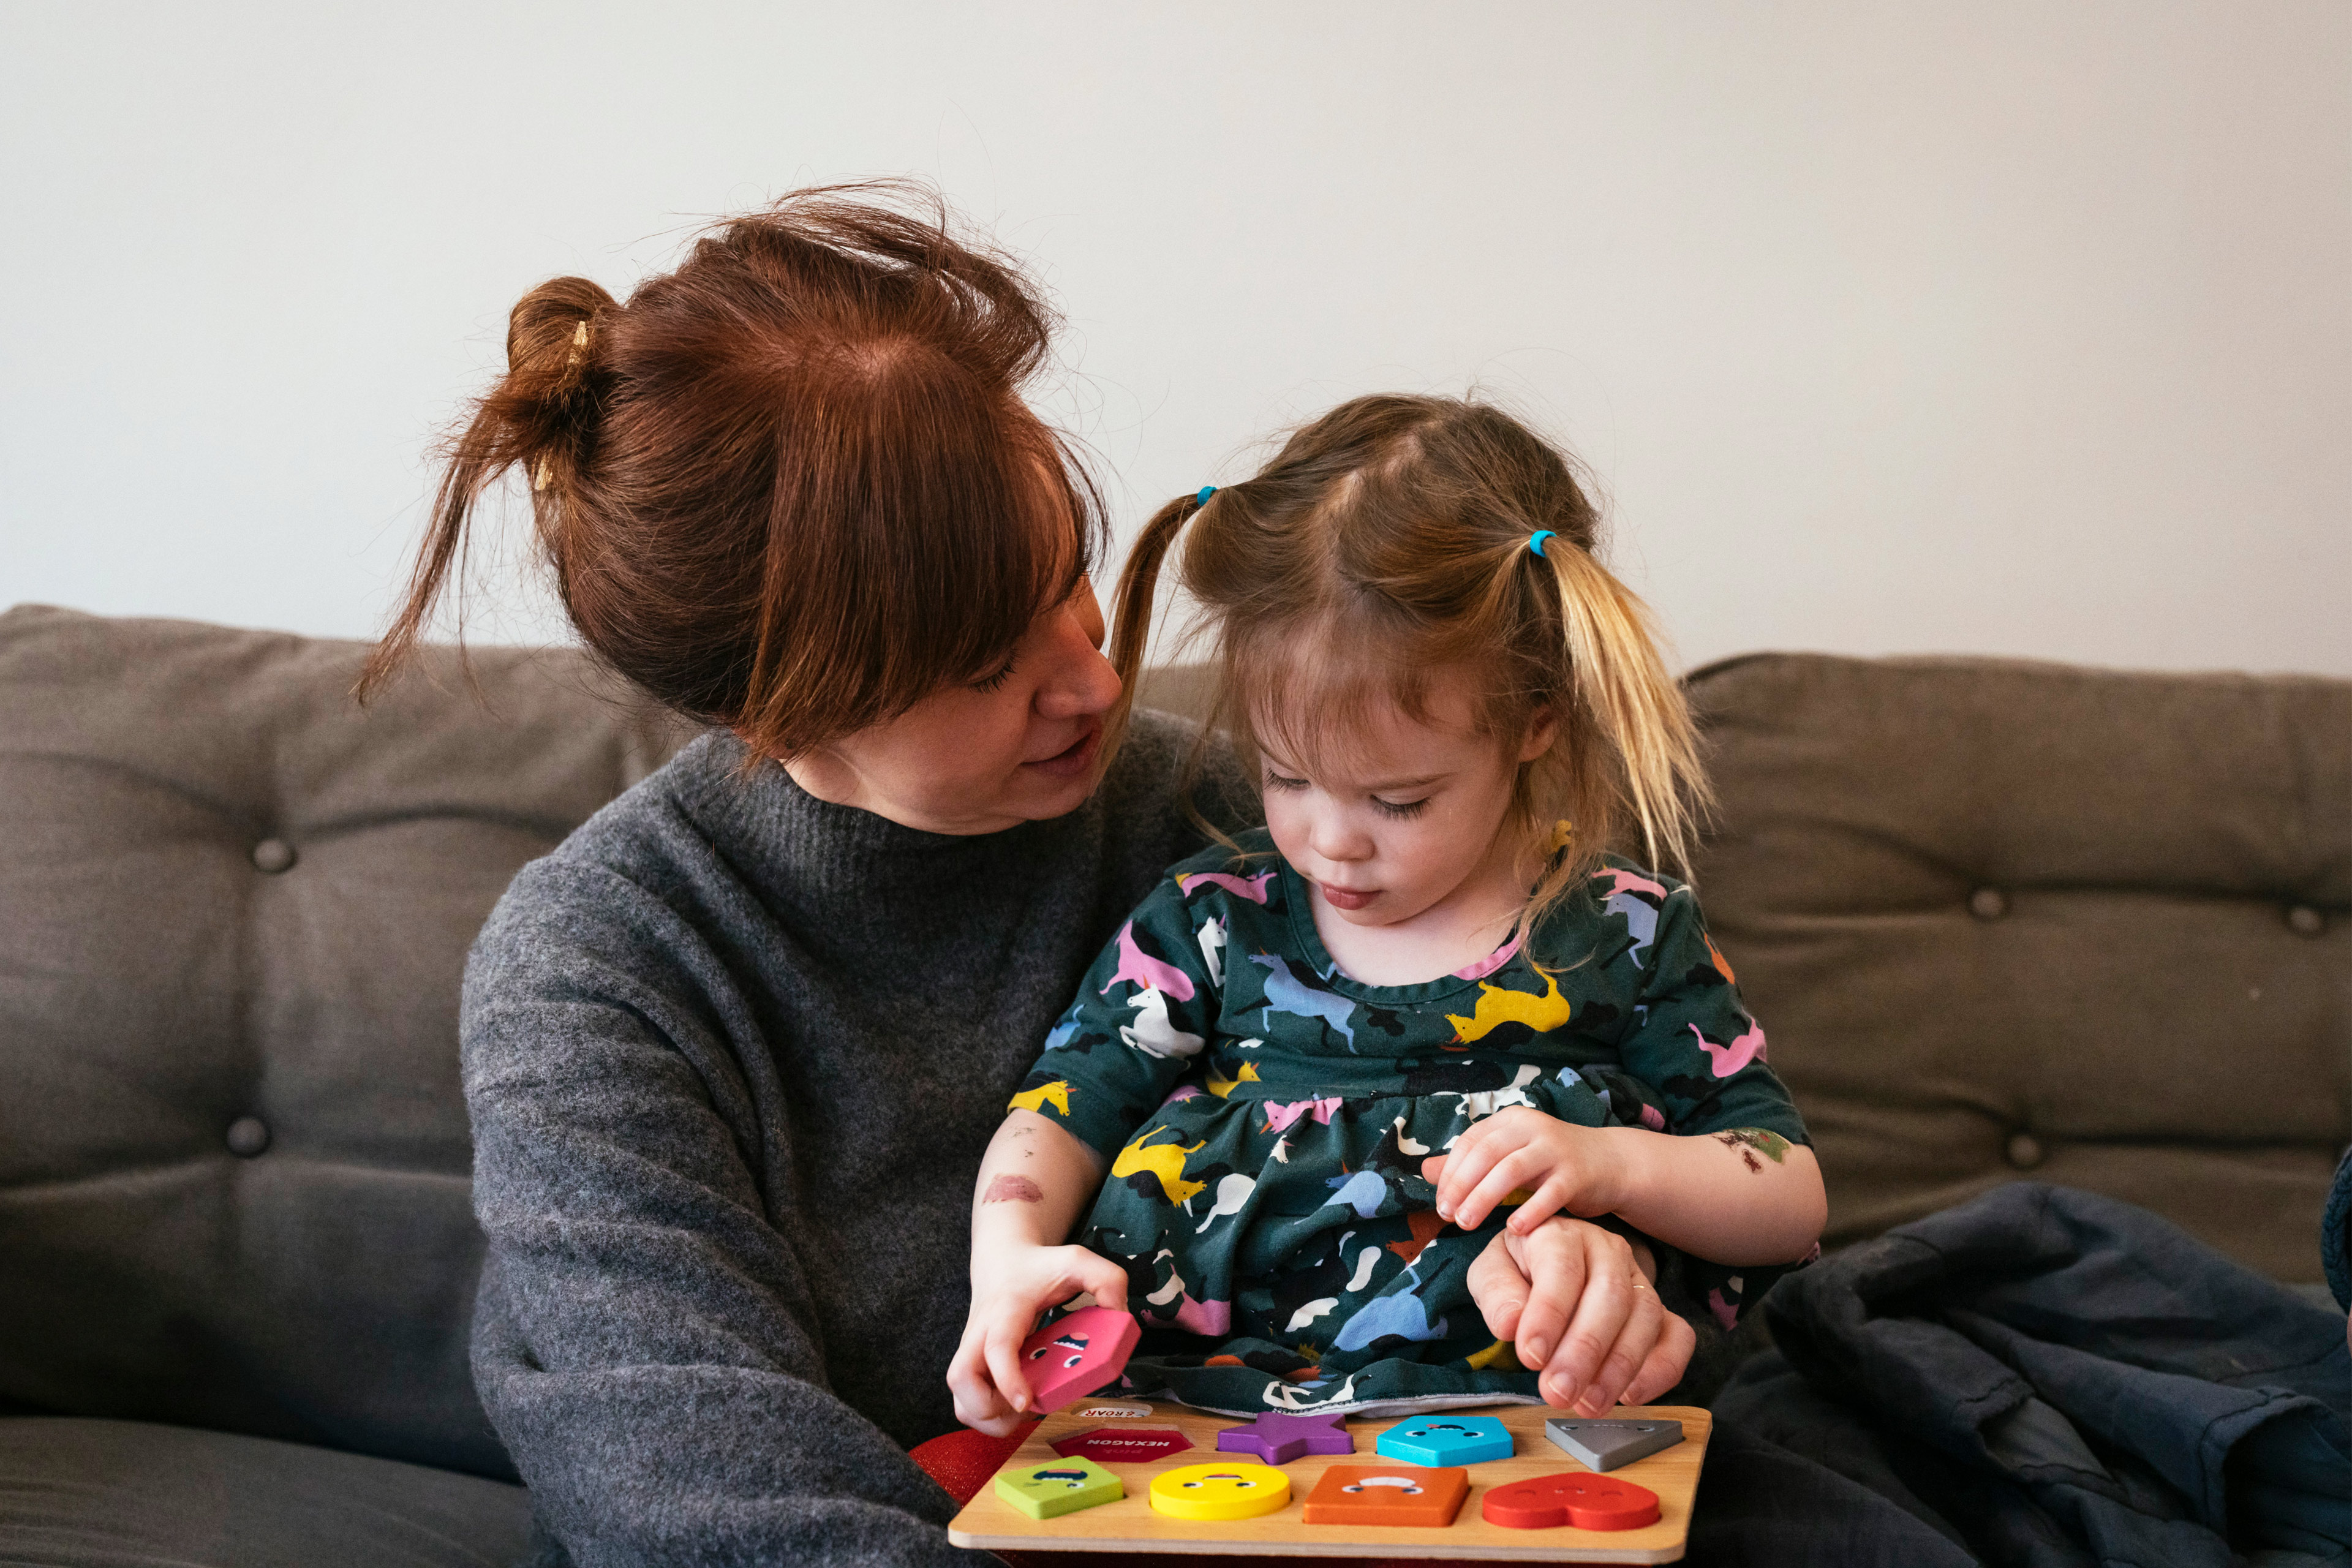 A photo shows Brenna Kearney and daughter Joey sitting on a couch together. Joey is playing with colorful block toys.